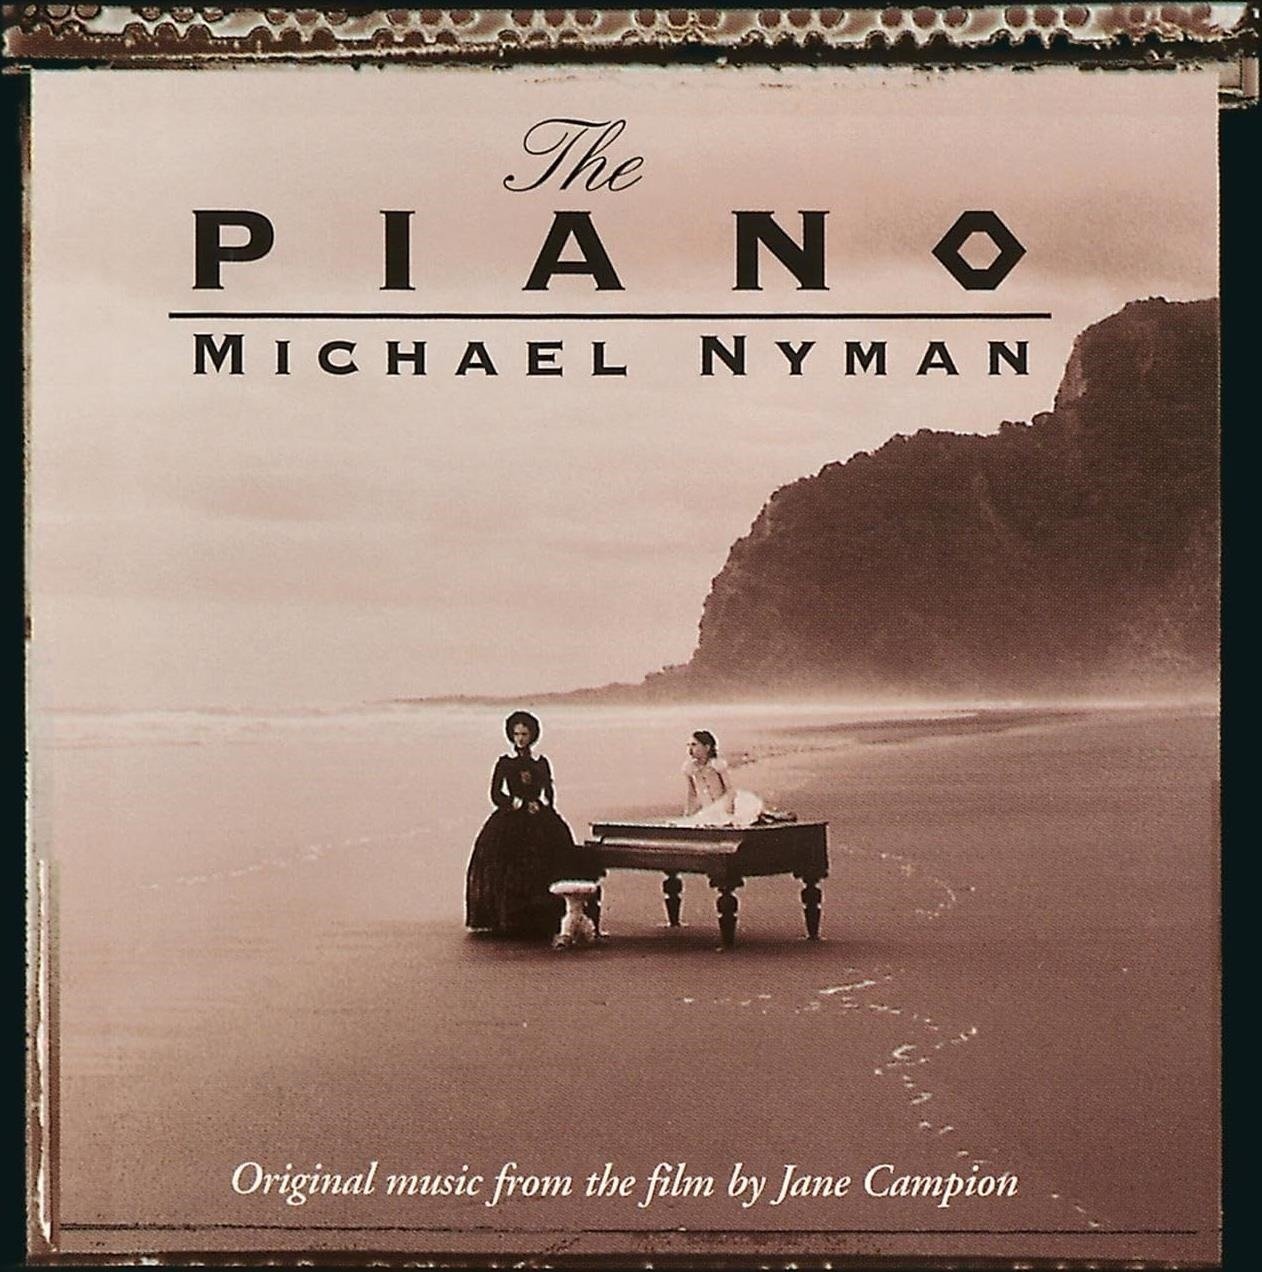 CD Shop - MICHAEL NYMAN THE PIANO: MUSIC FROM THE MOTION PICTURE